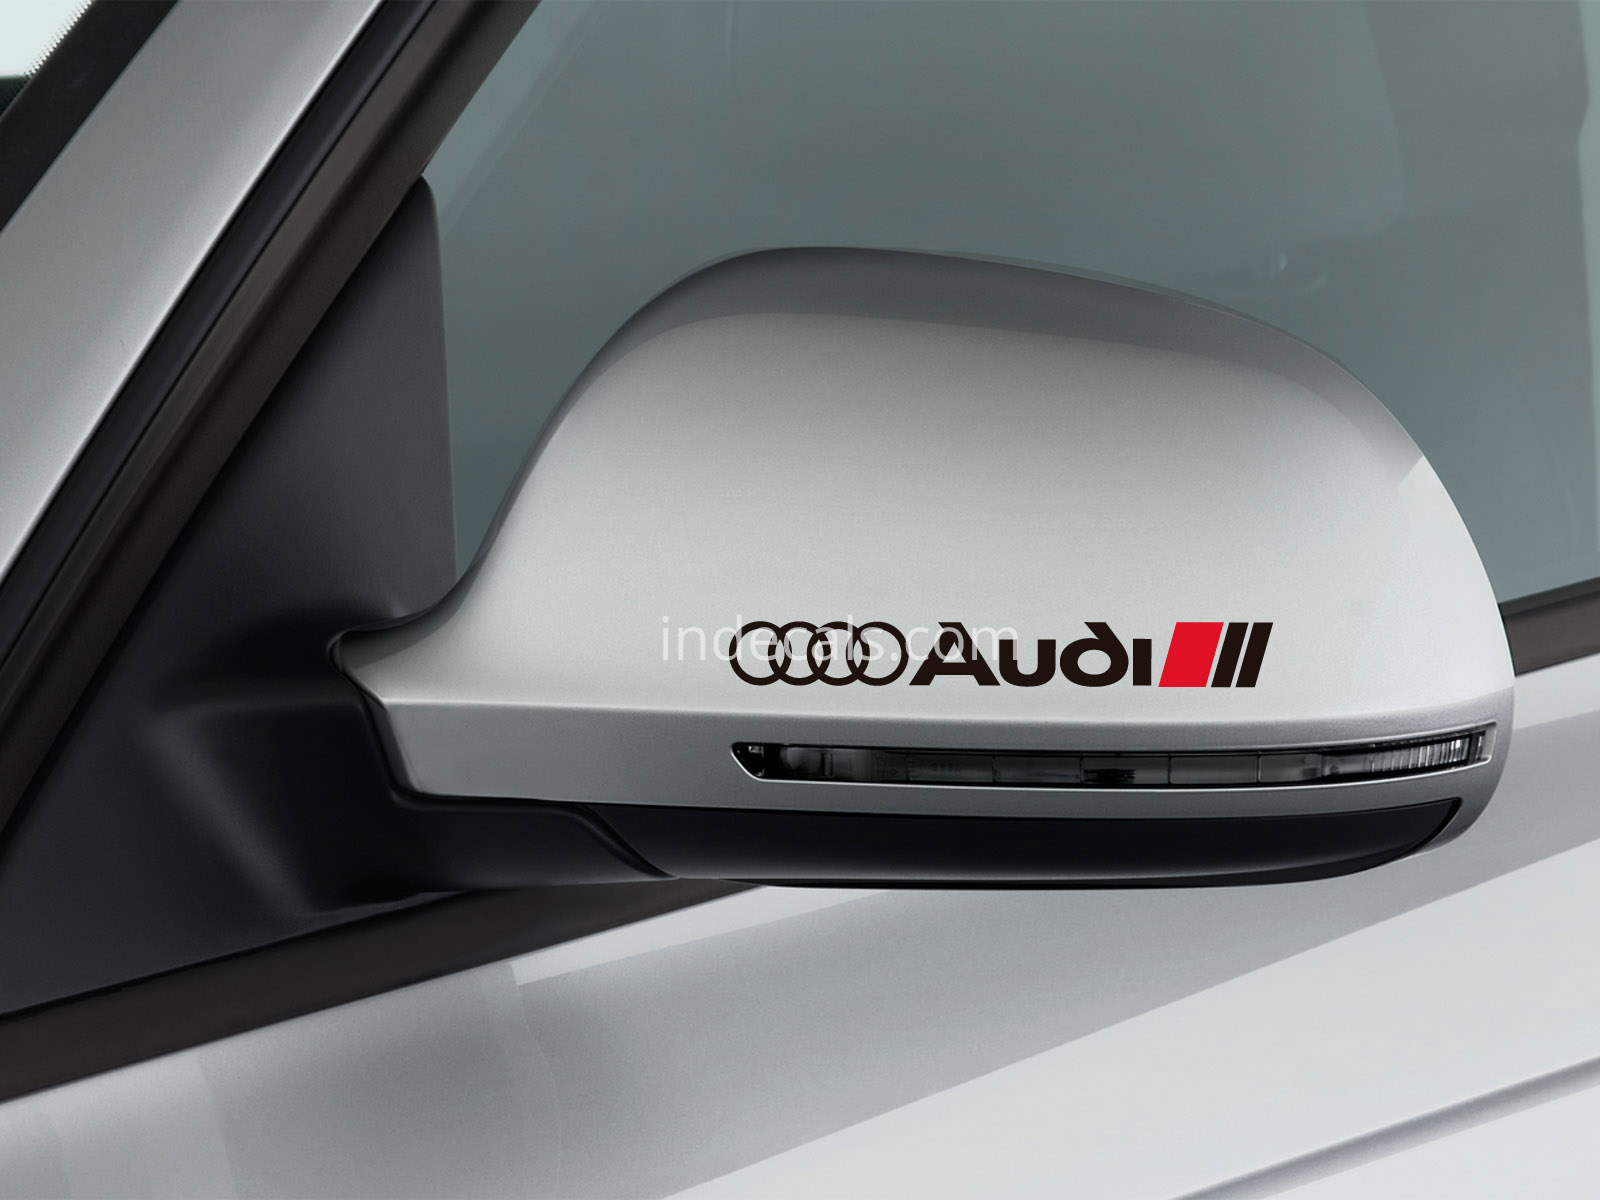 3 x Audi Stickers for Mirrors - Black